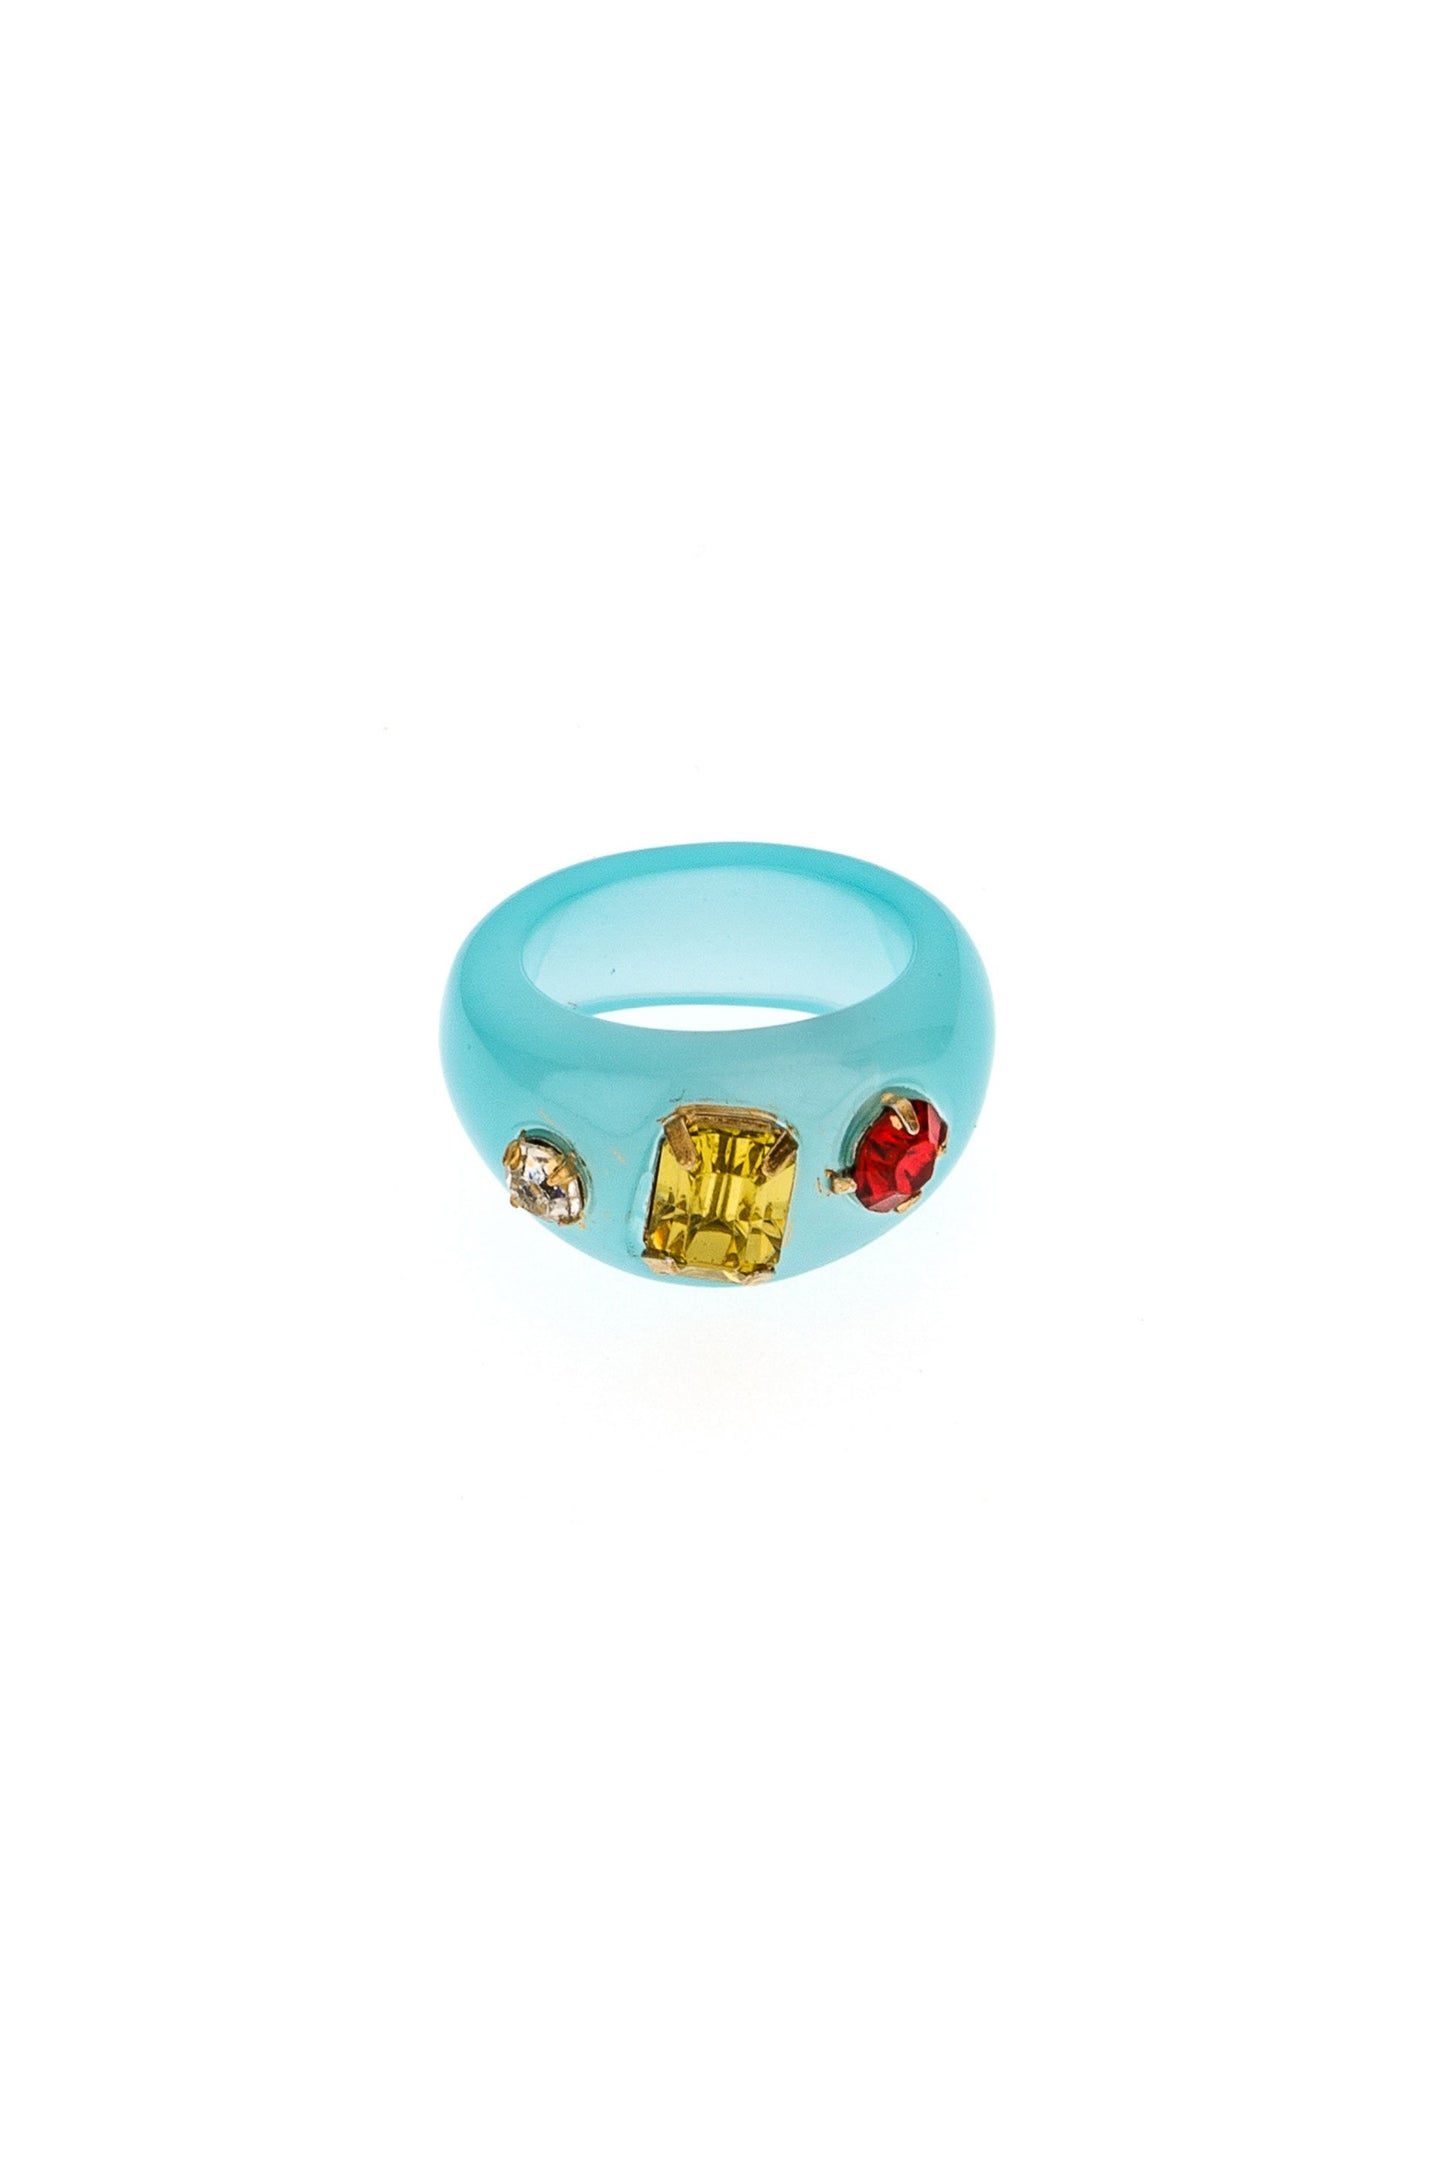 Jeweled Blue Resin Ring on white